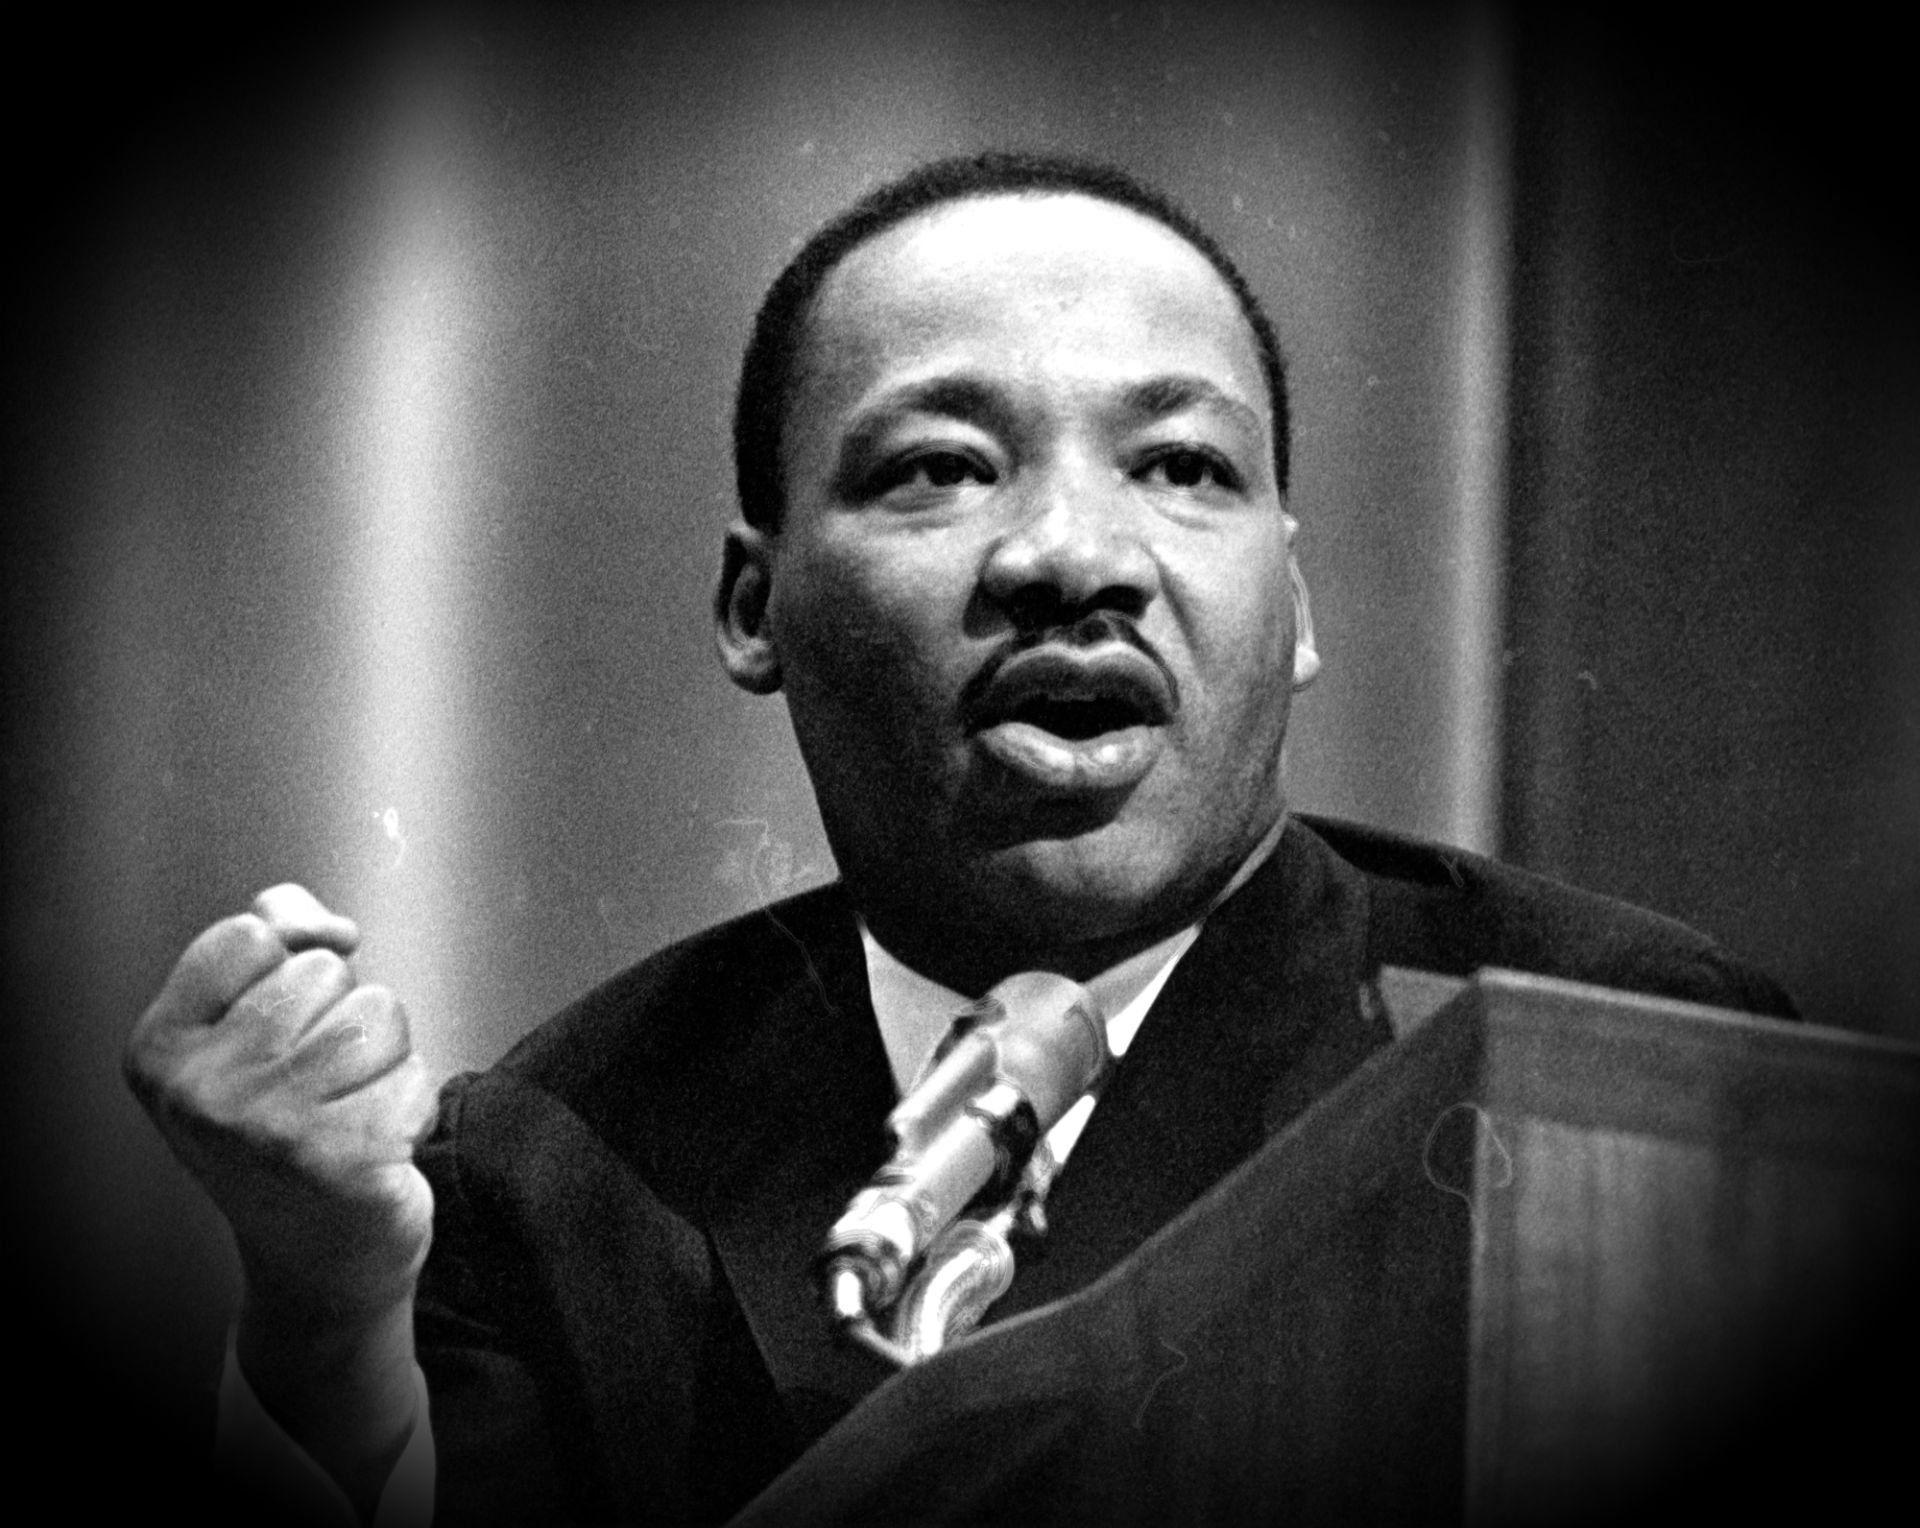 Martin Luther King jr HD Image Wallpaper Picture with Messages